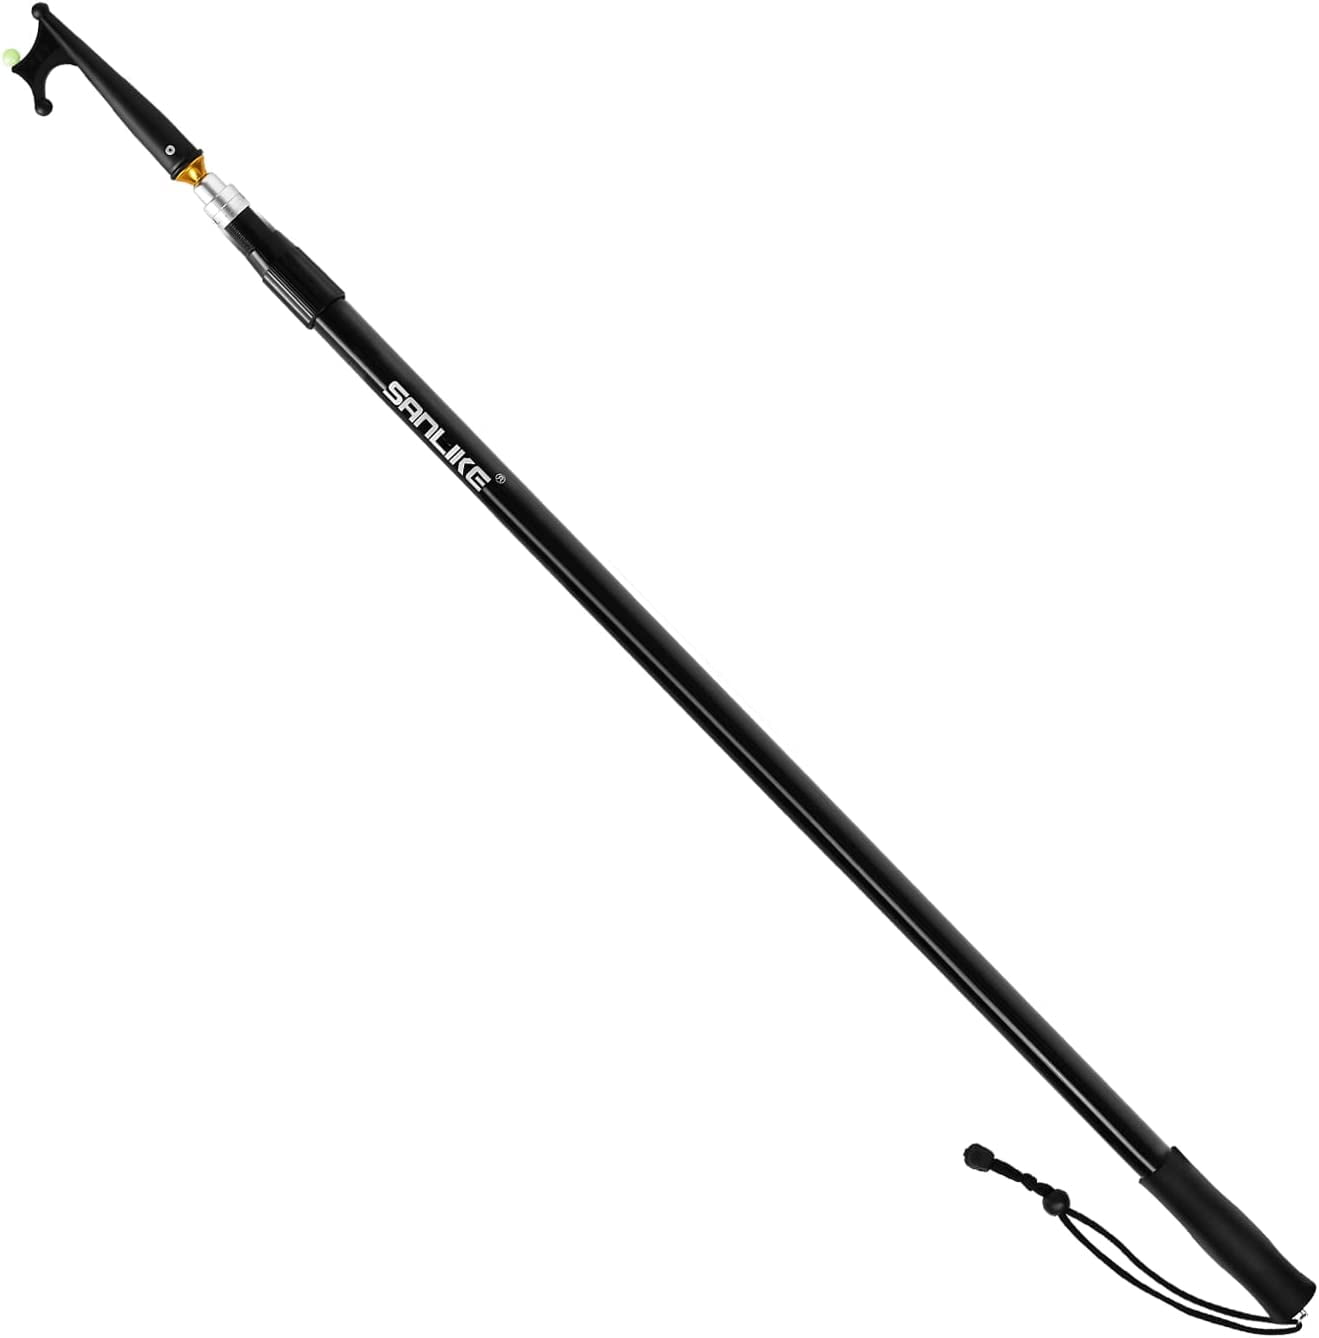 SAN LIKE Telescoping Boat Hooks Adjustable Boat Hook Pole 11.2FT-  Floating,Durable,Rust-Resistant with Luminous Bead,Push Pole for  Docking&Balck 